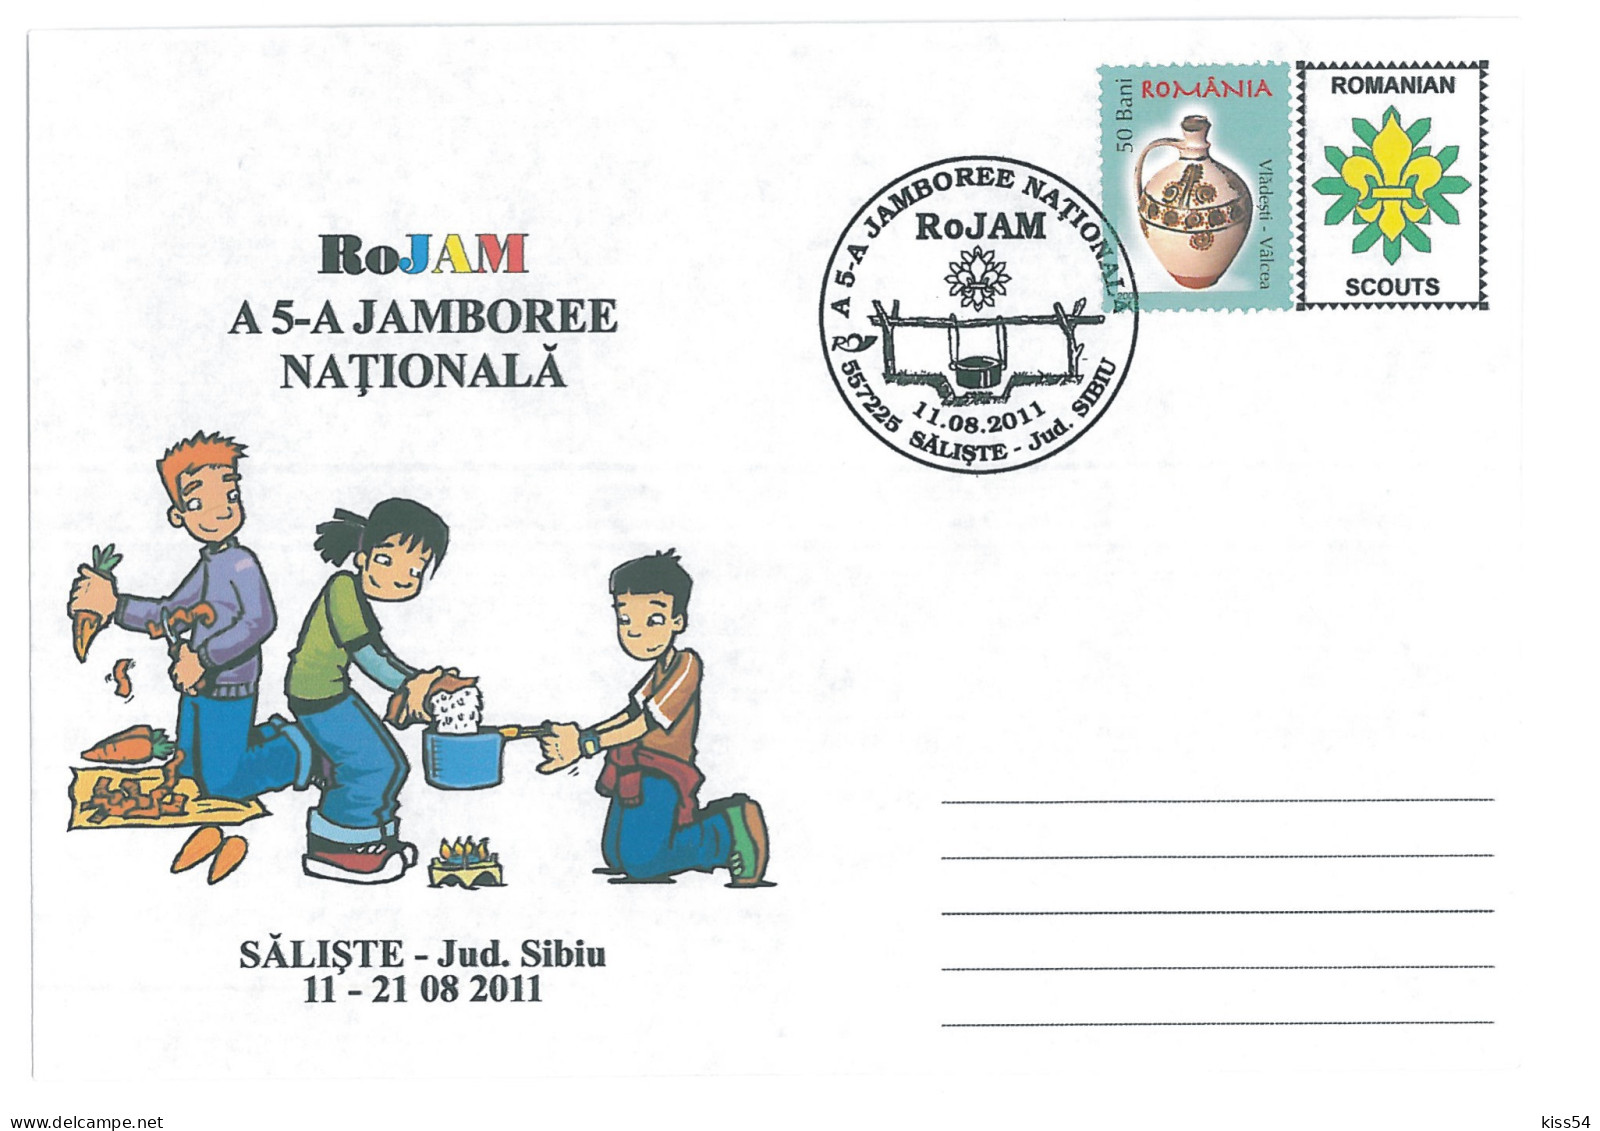 SC 47 - 1298 ROMANIA, National JAMBOREE, Scout - Cover - Used - 2011 - Covers & Documents